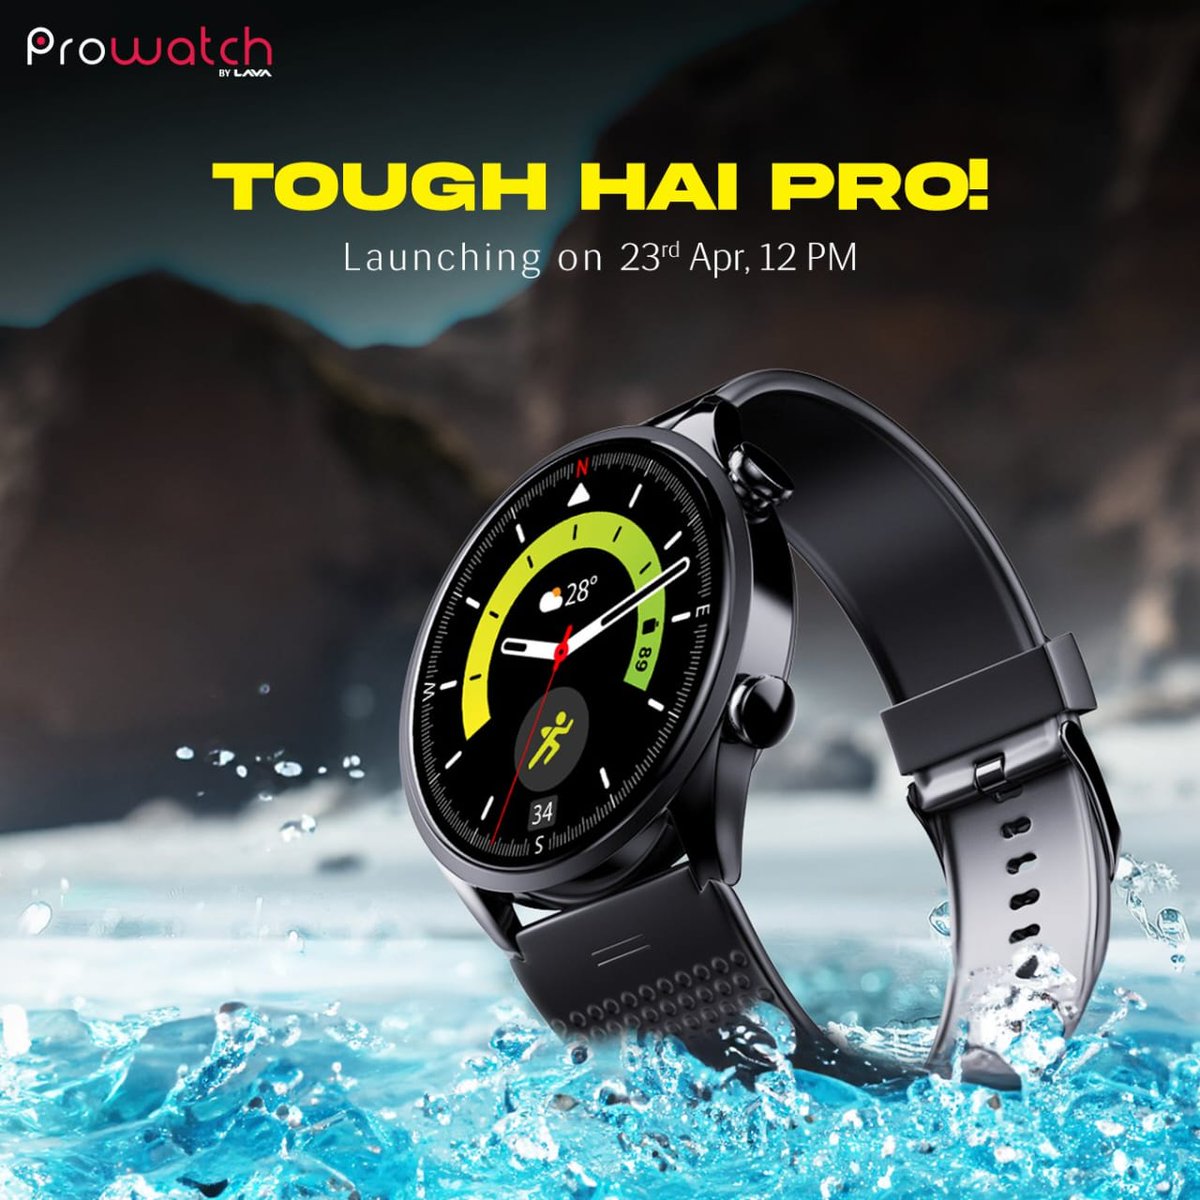 Excited to announce I'll be there for the #ProwatchLaunchTomorrow on April 23rd! Can't wait to see the latest in wearable tech with Gorilla Glass 3 protection.